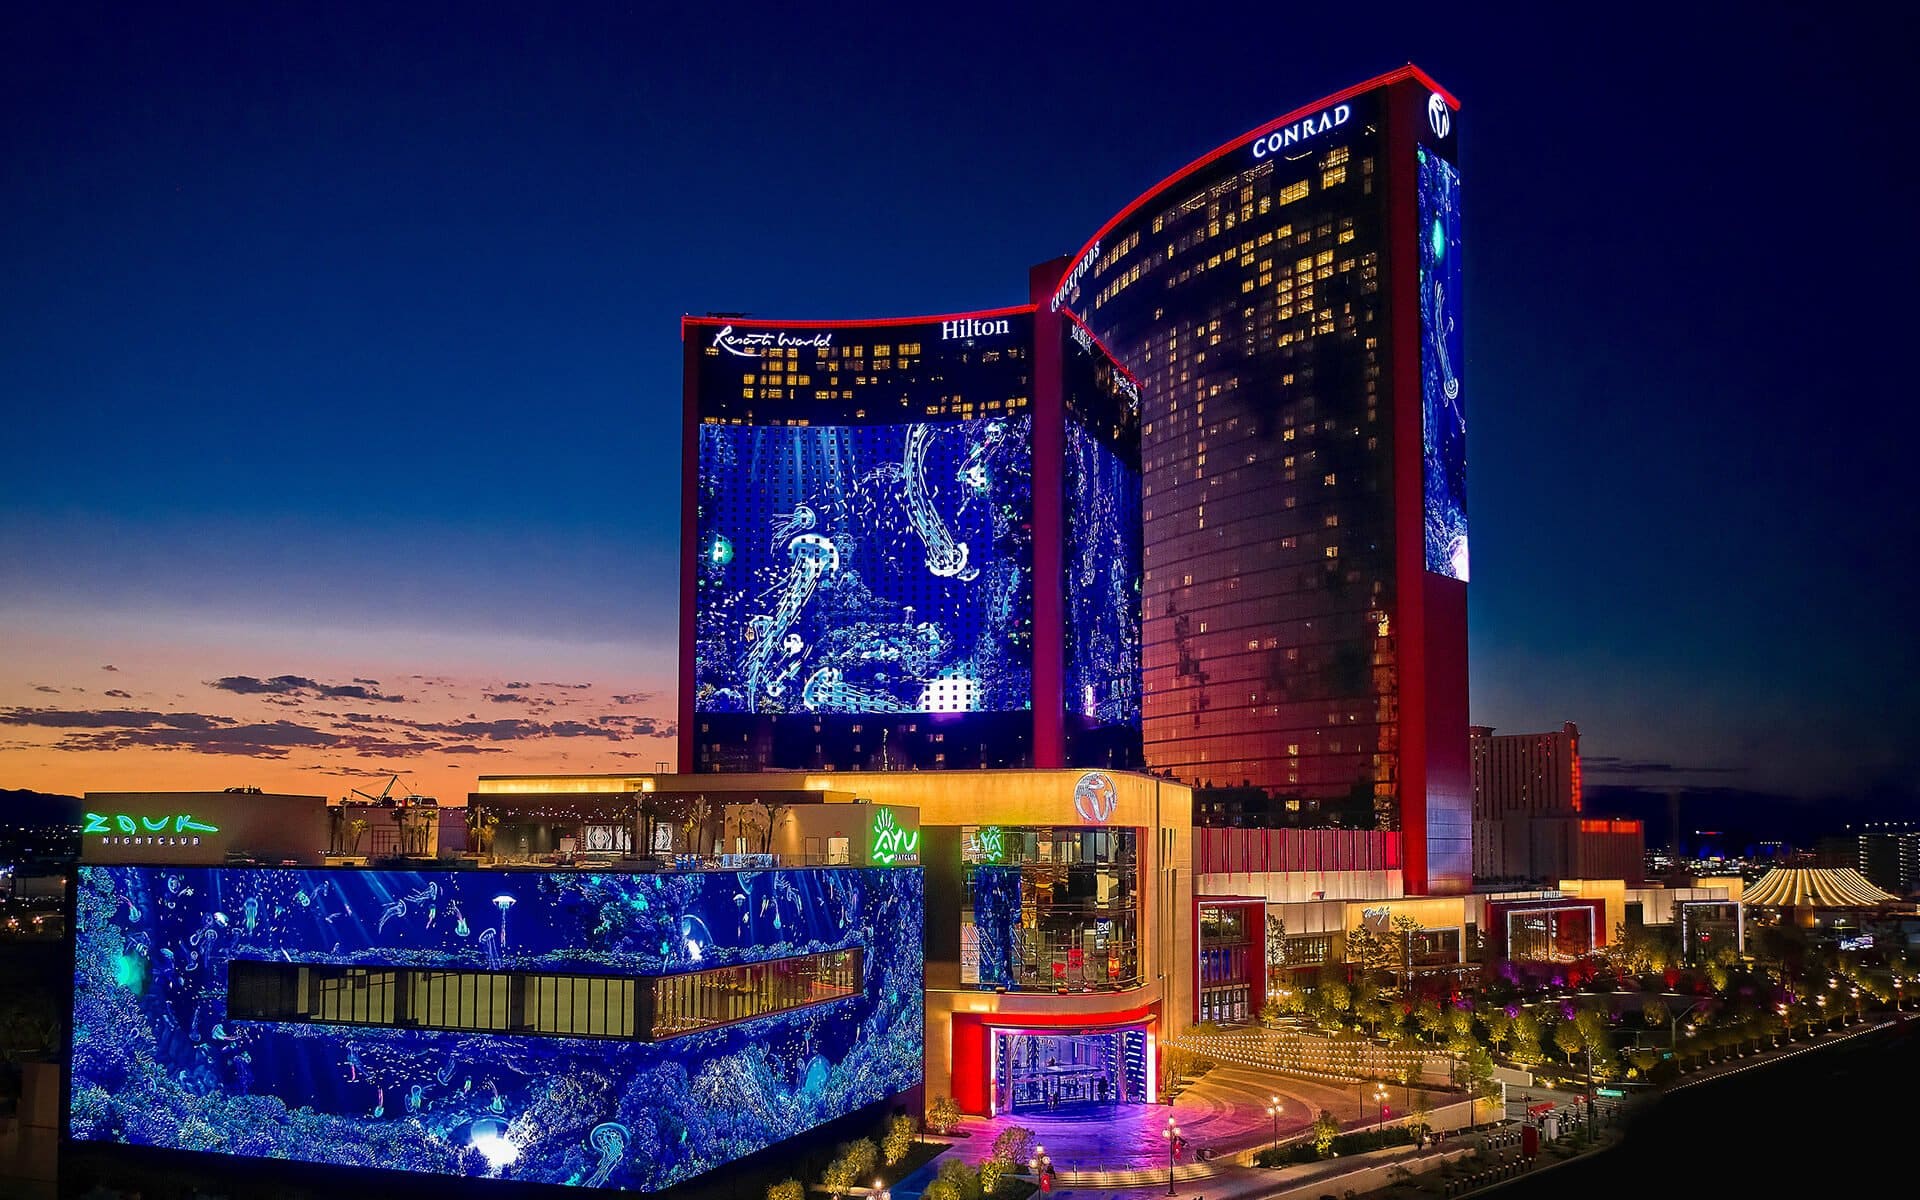 Insomniac's Unique Hotel Experience for EDC Las Vegas 2023 Is a Rave  Wonderland -  - The Latest Electronic Dance Music News, Reviews &  Artists